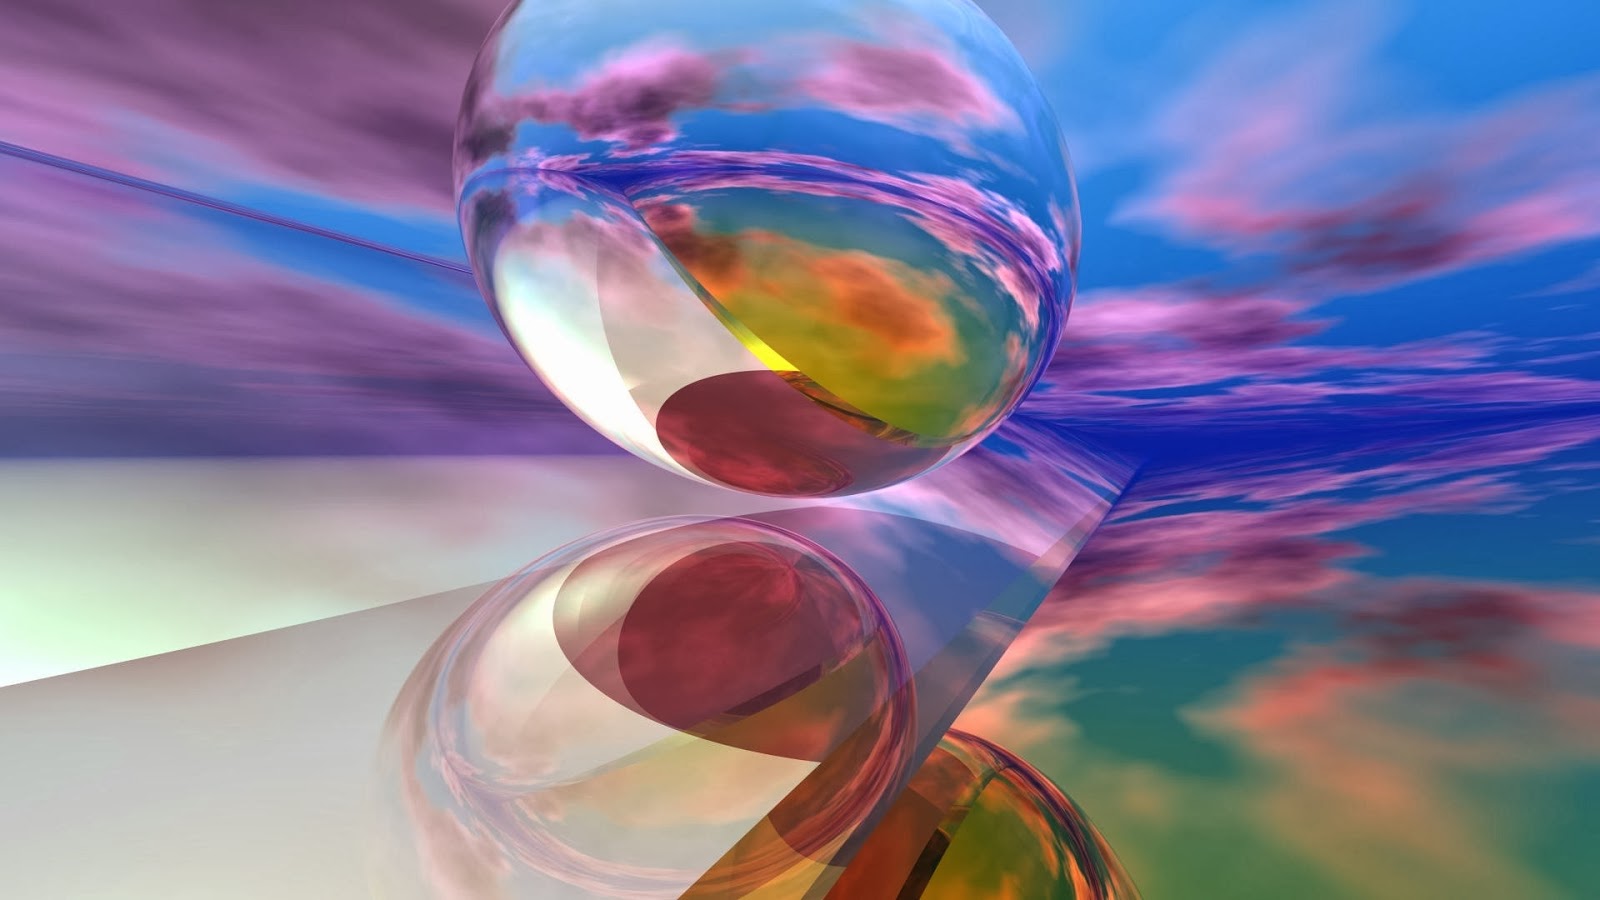 abstract wallpaper 1920x1080,water,transparent material,colorfulness,glass,liquid bubble